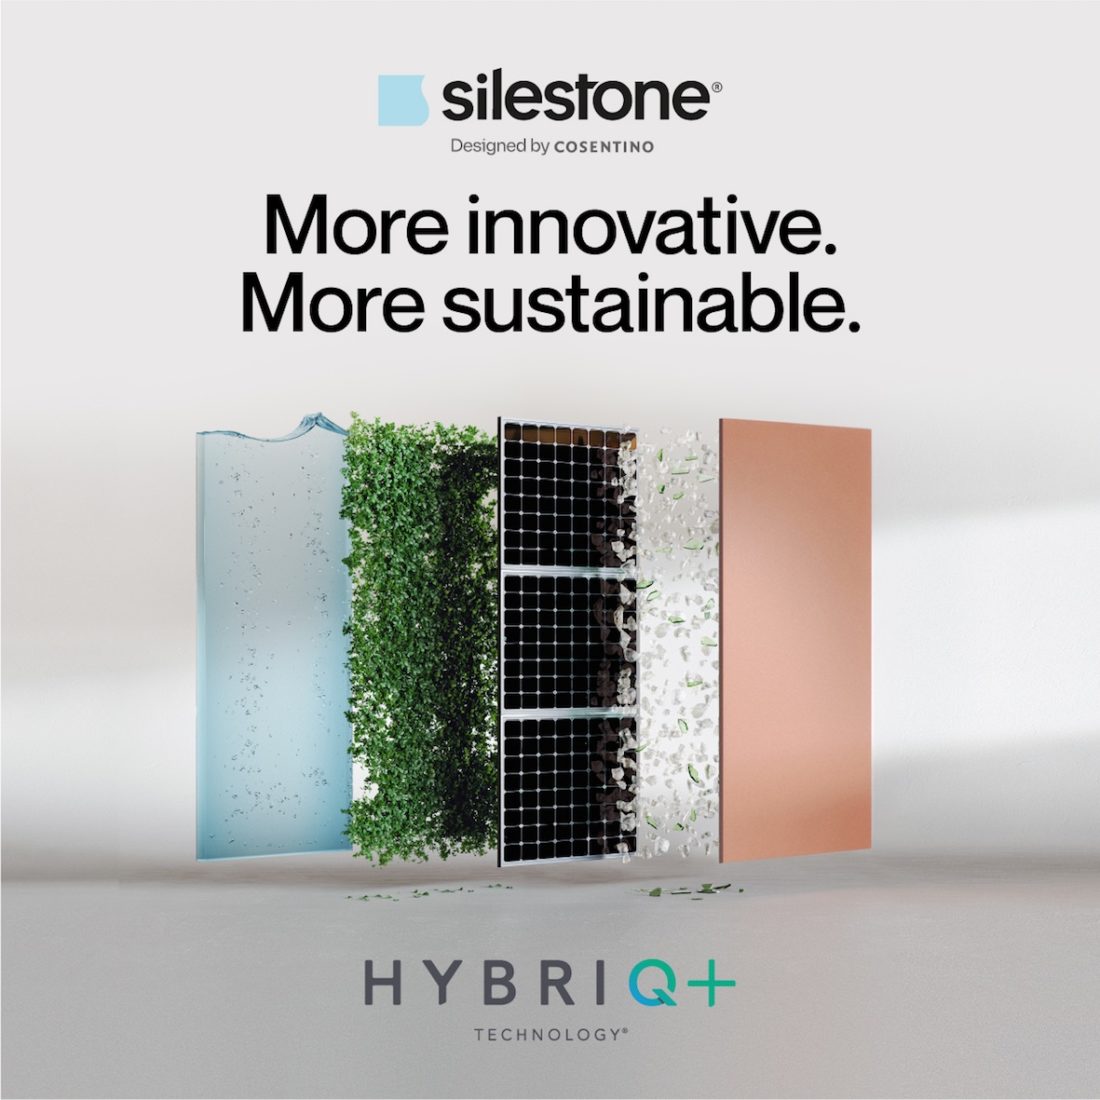 Image 18 of HybriQ image 2022 in New Silestone campaign: innovation and sustainability to change the world - Cosentino